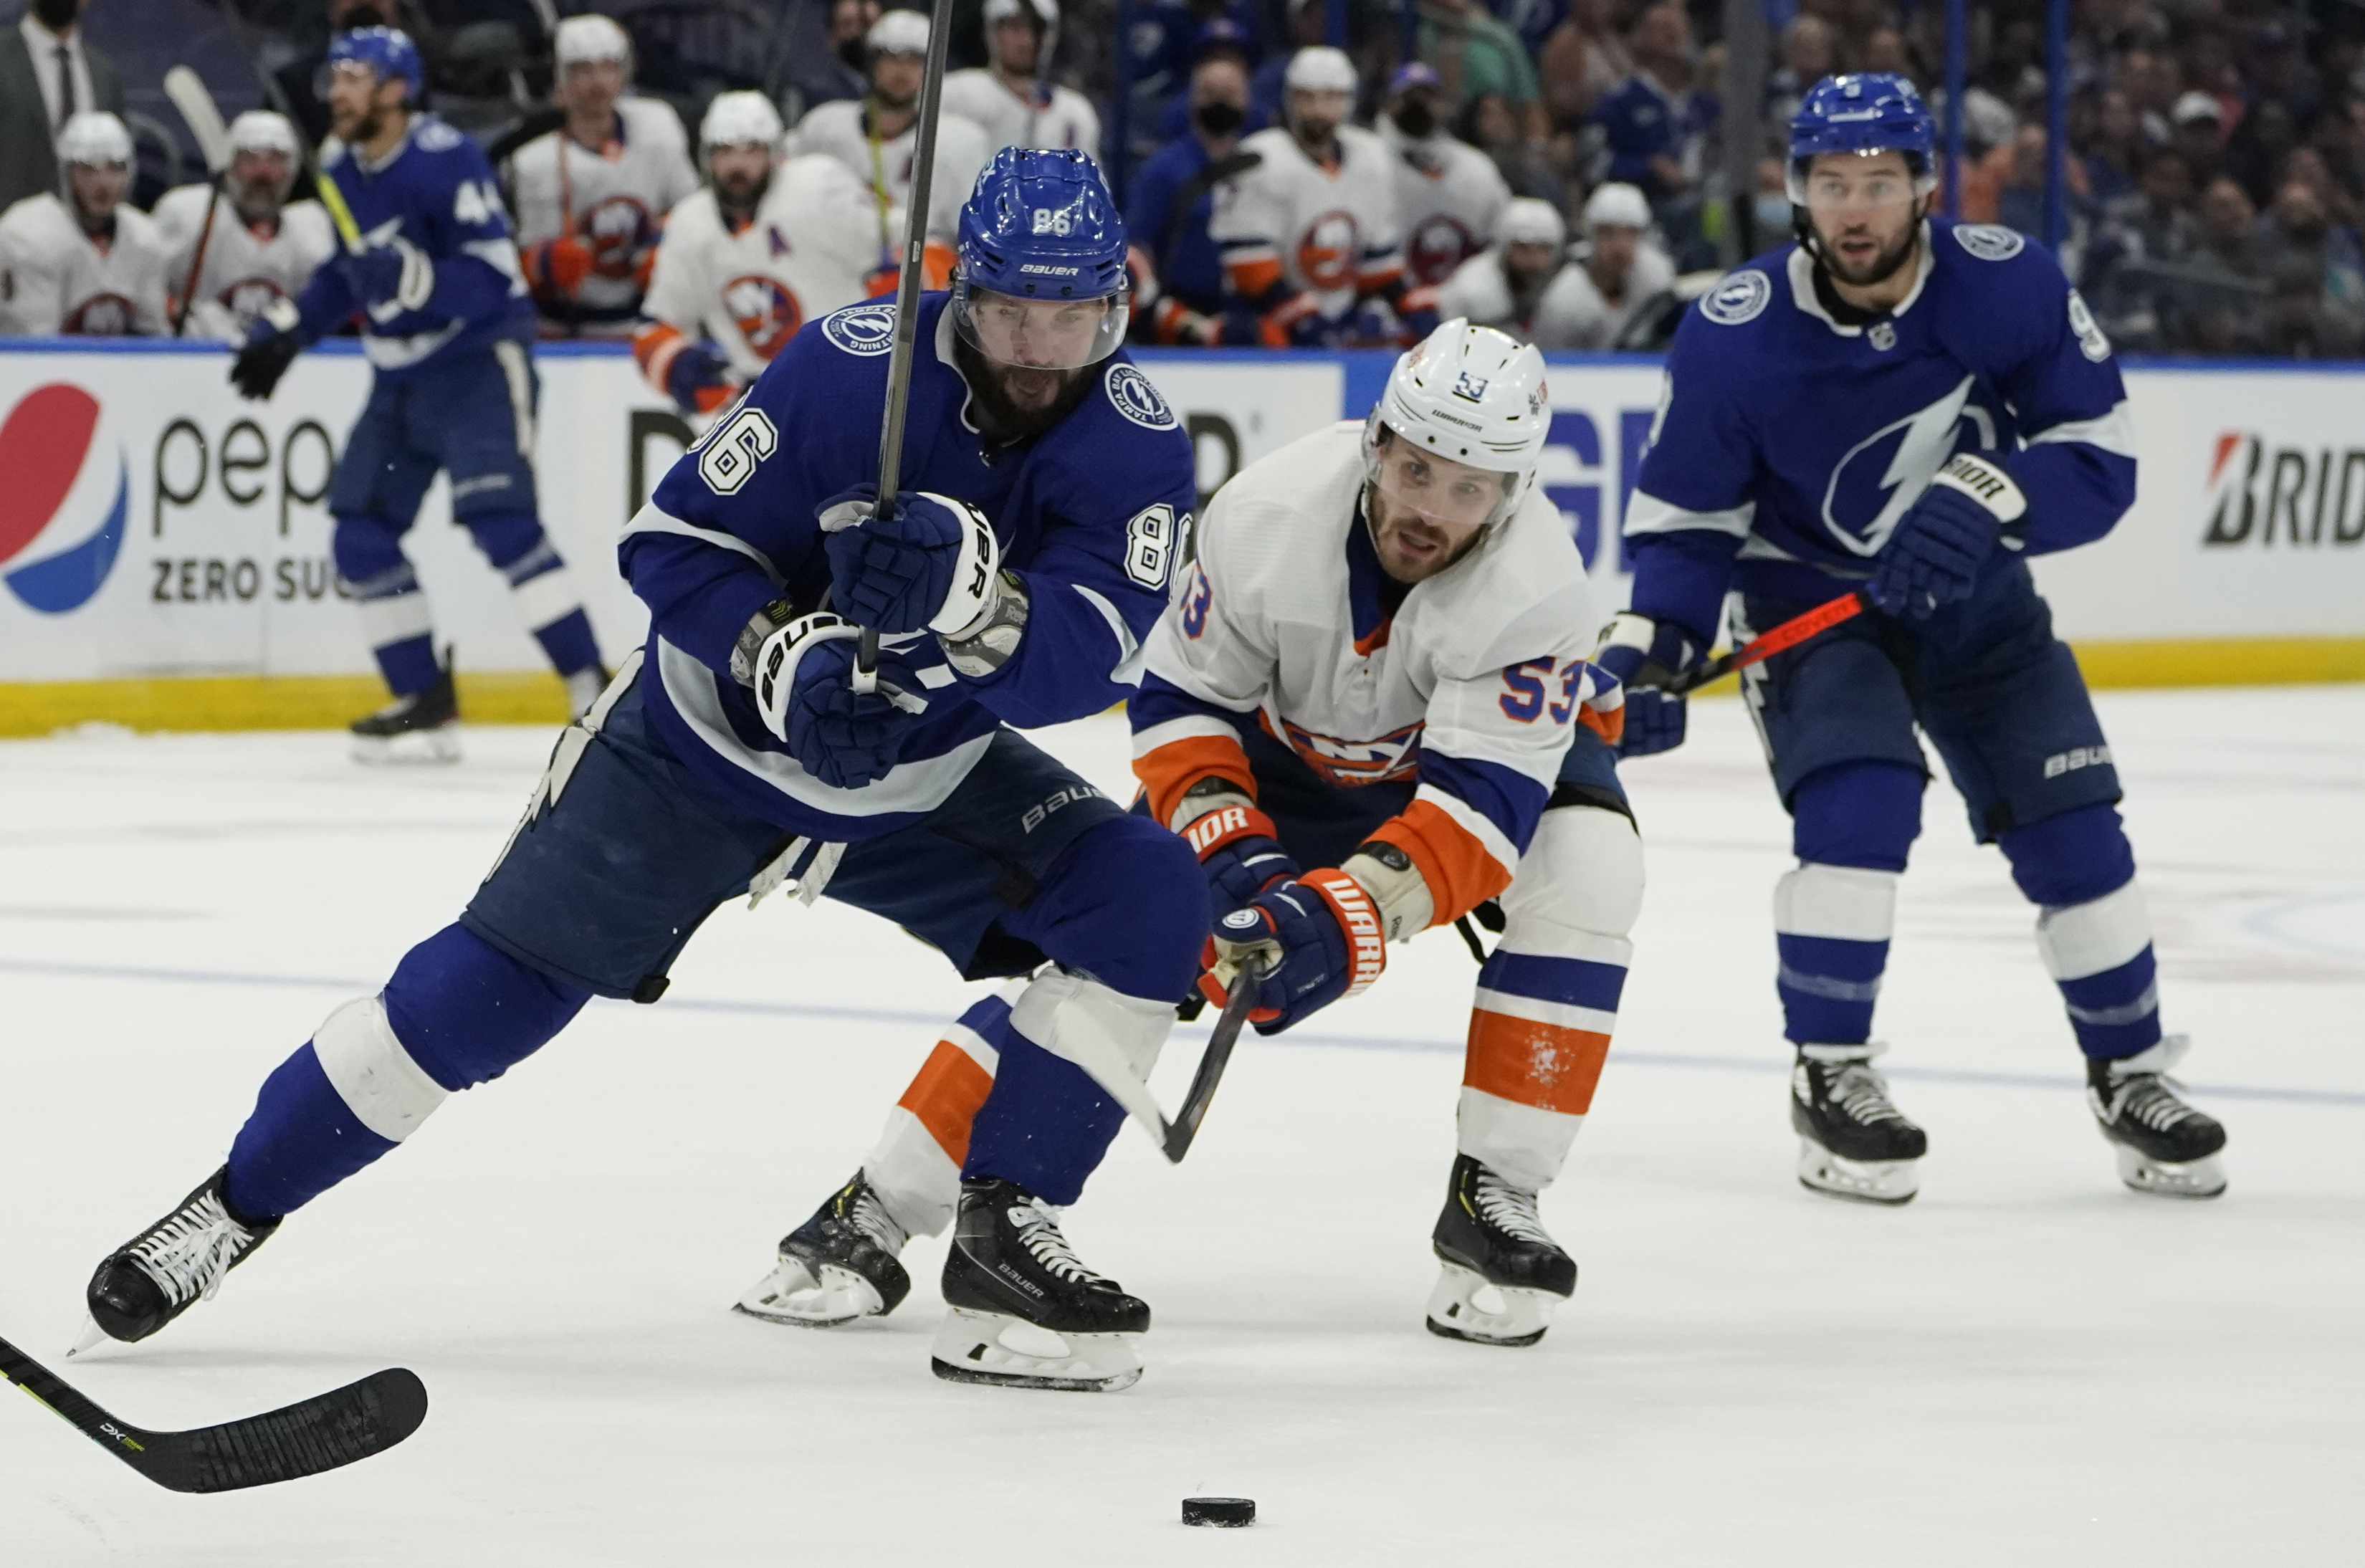 Tampa Bay Lightning at New York Islanders Game 3 free live stream (6/17/21) How to watch NHL Playoffs, time, channel